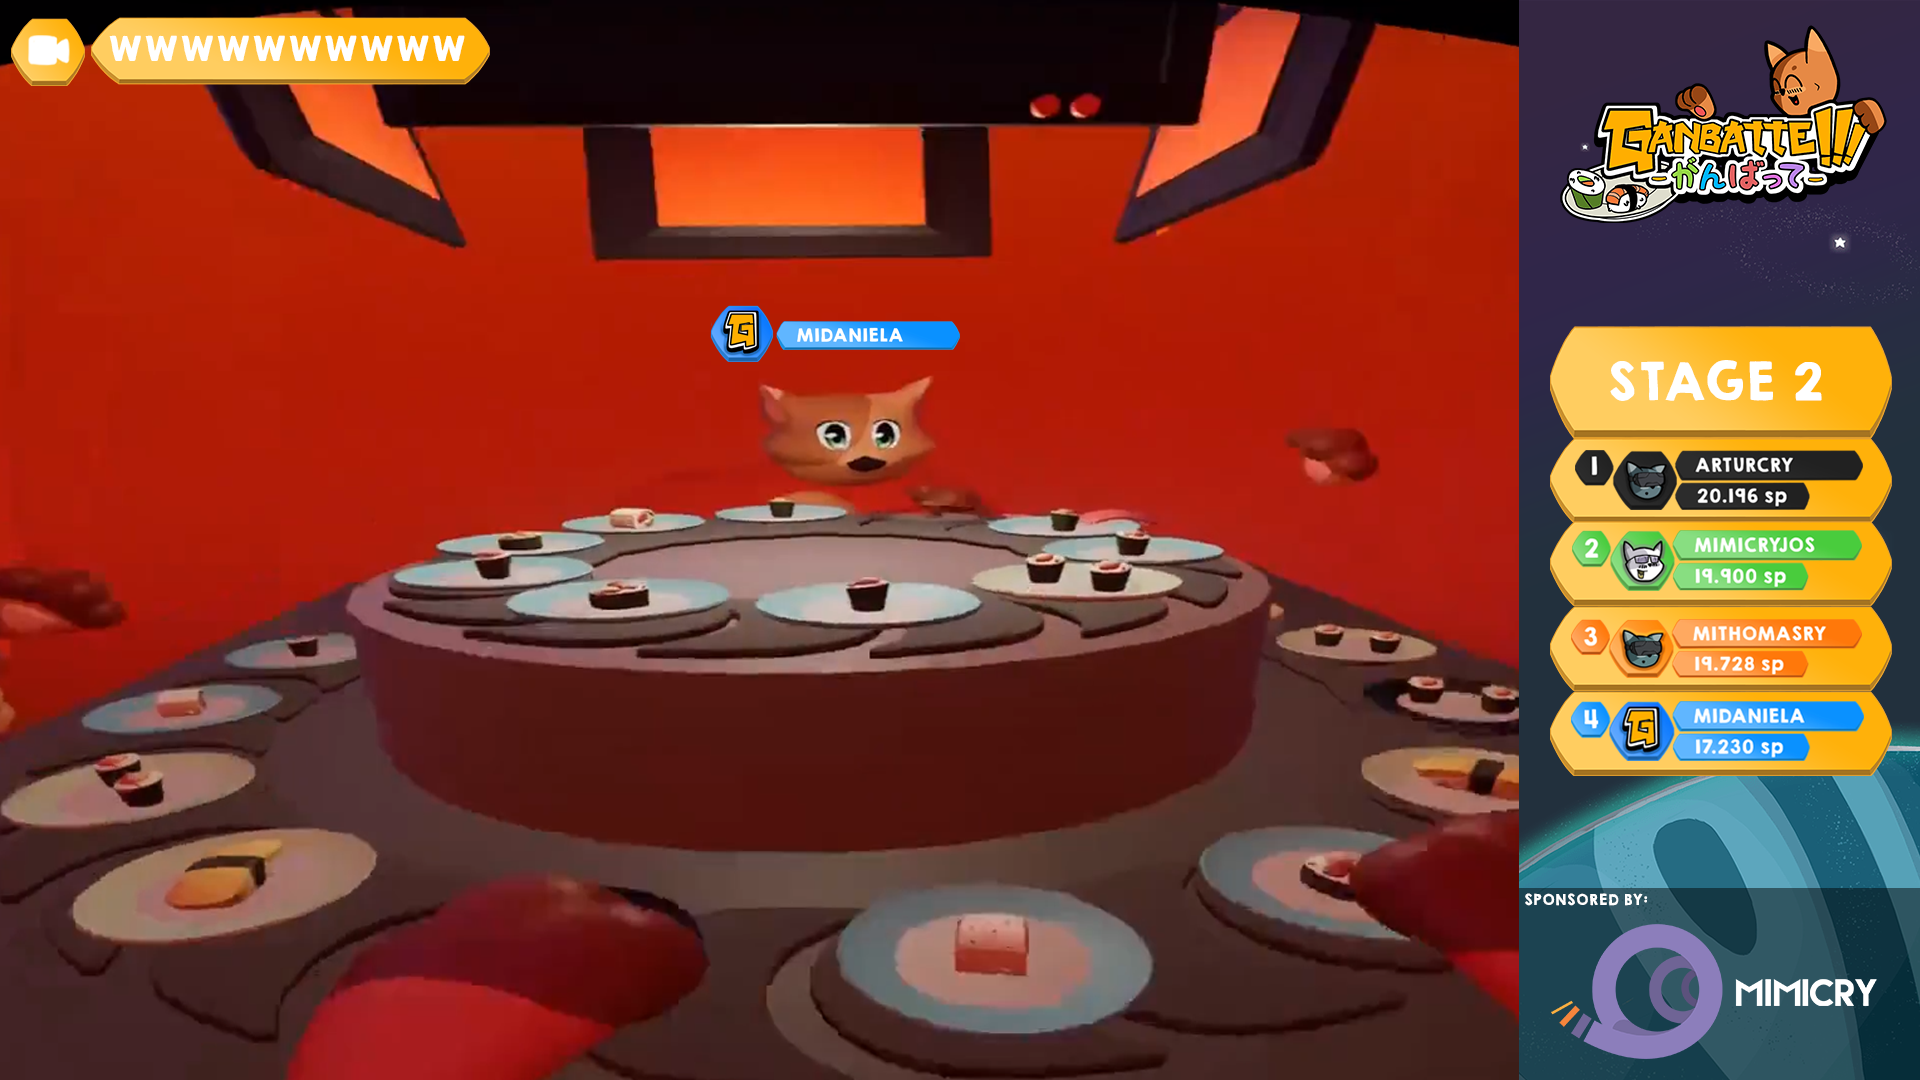 Ganbatte VR game, game view of the spectator screen.